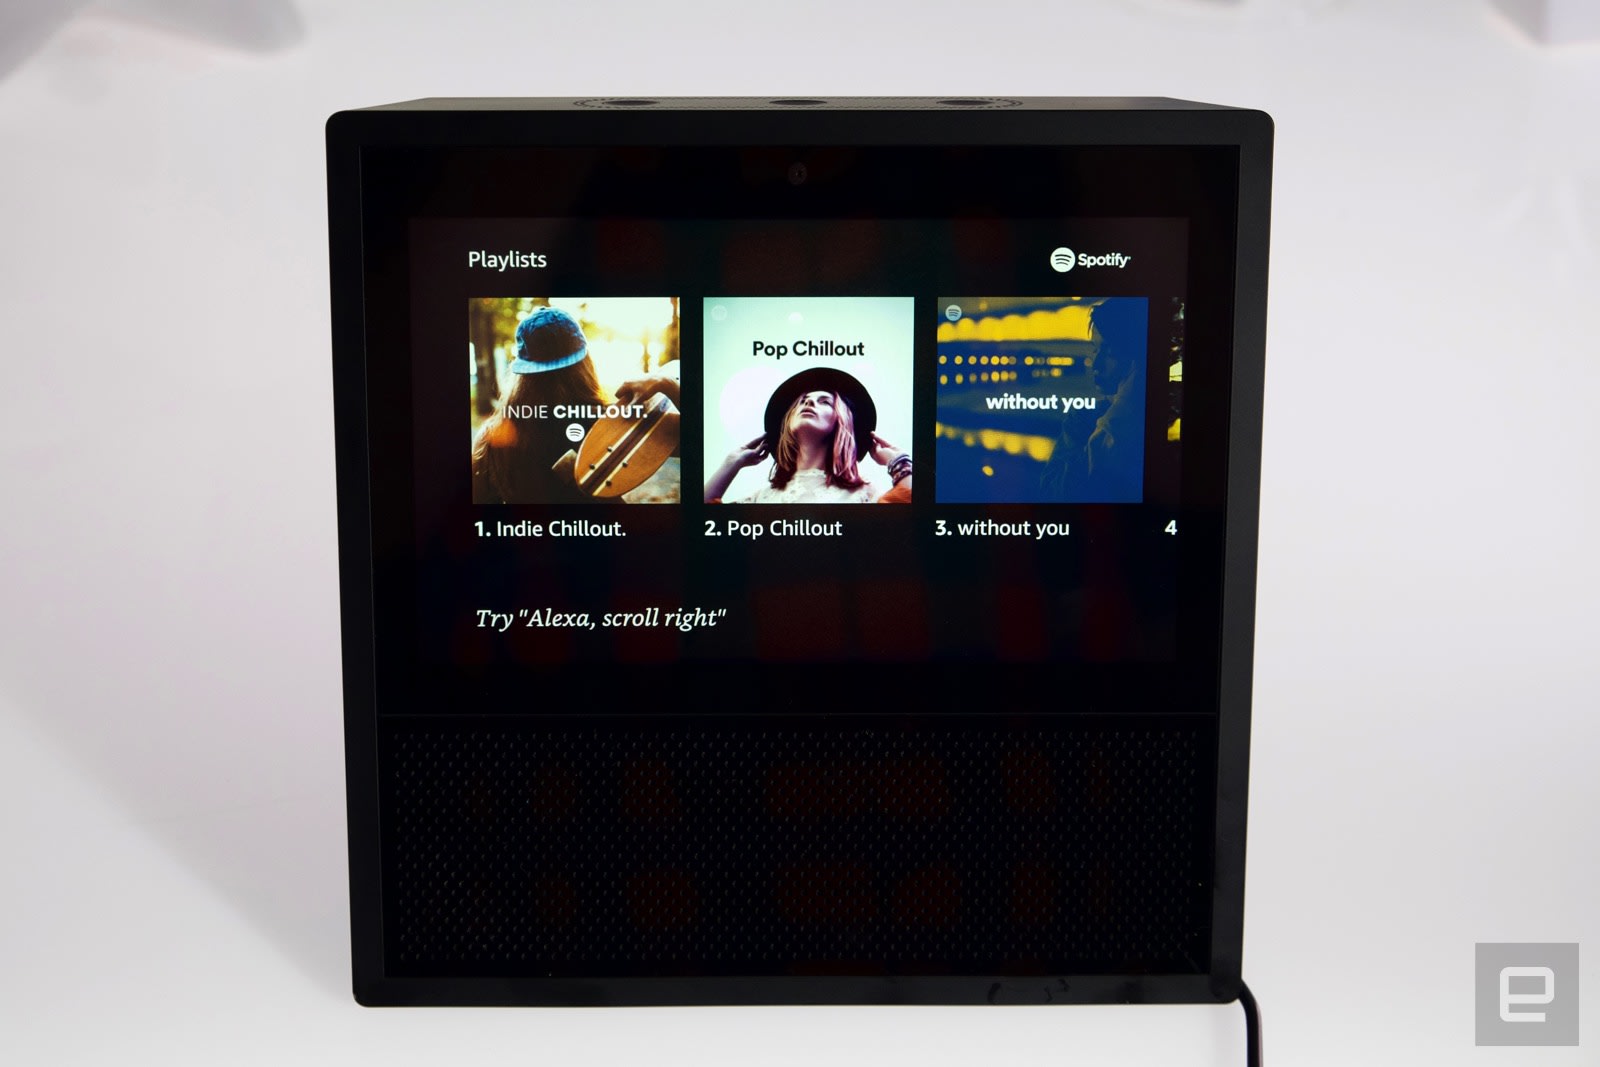 Amazon Echo Show Seeing believing | Engadget